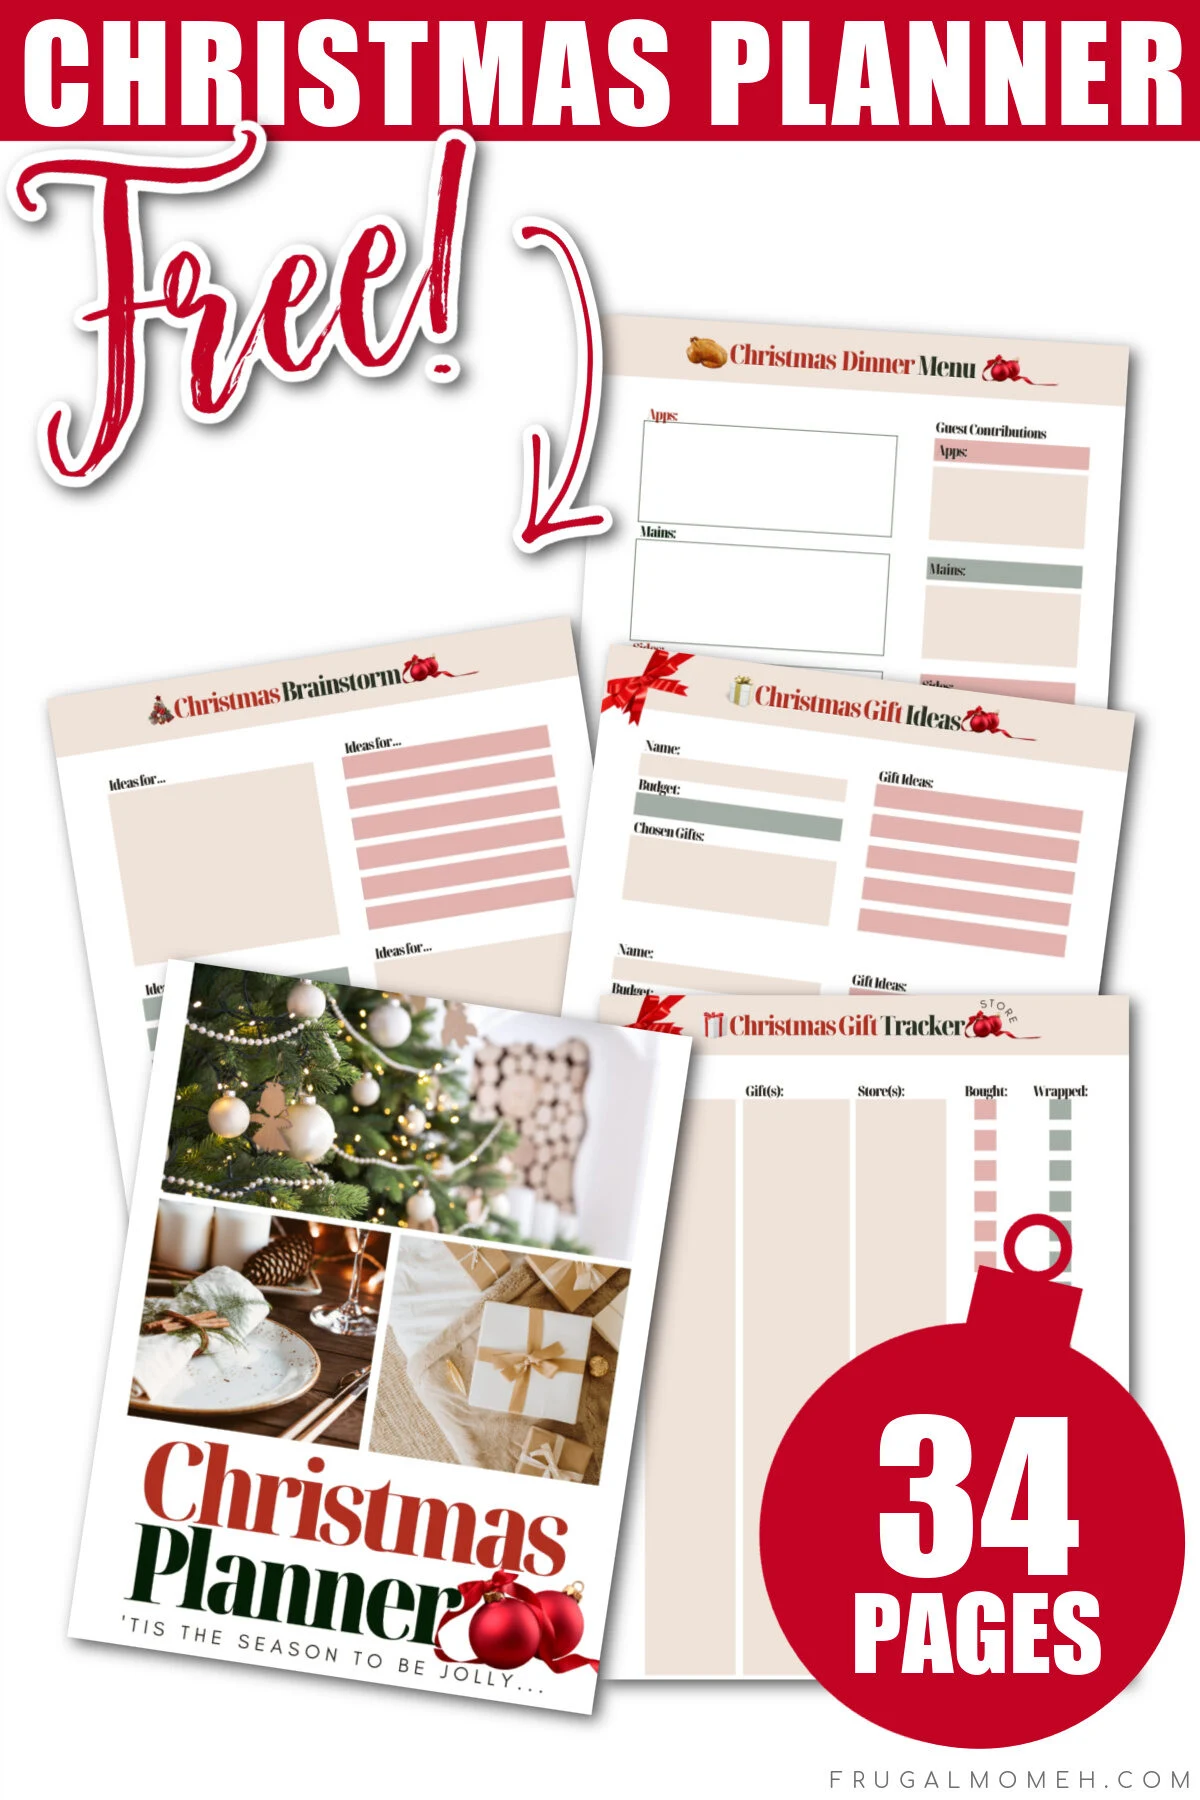 I've got the ultimate Christmas planner sheets to help you organize all your holiday plans and budget. Get the free printable sheets here!